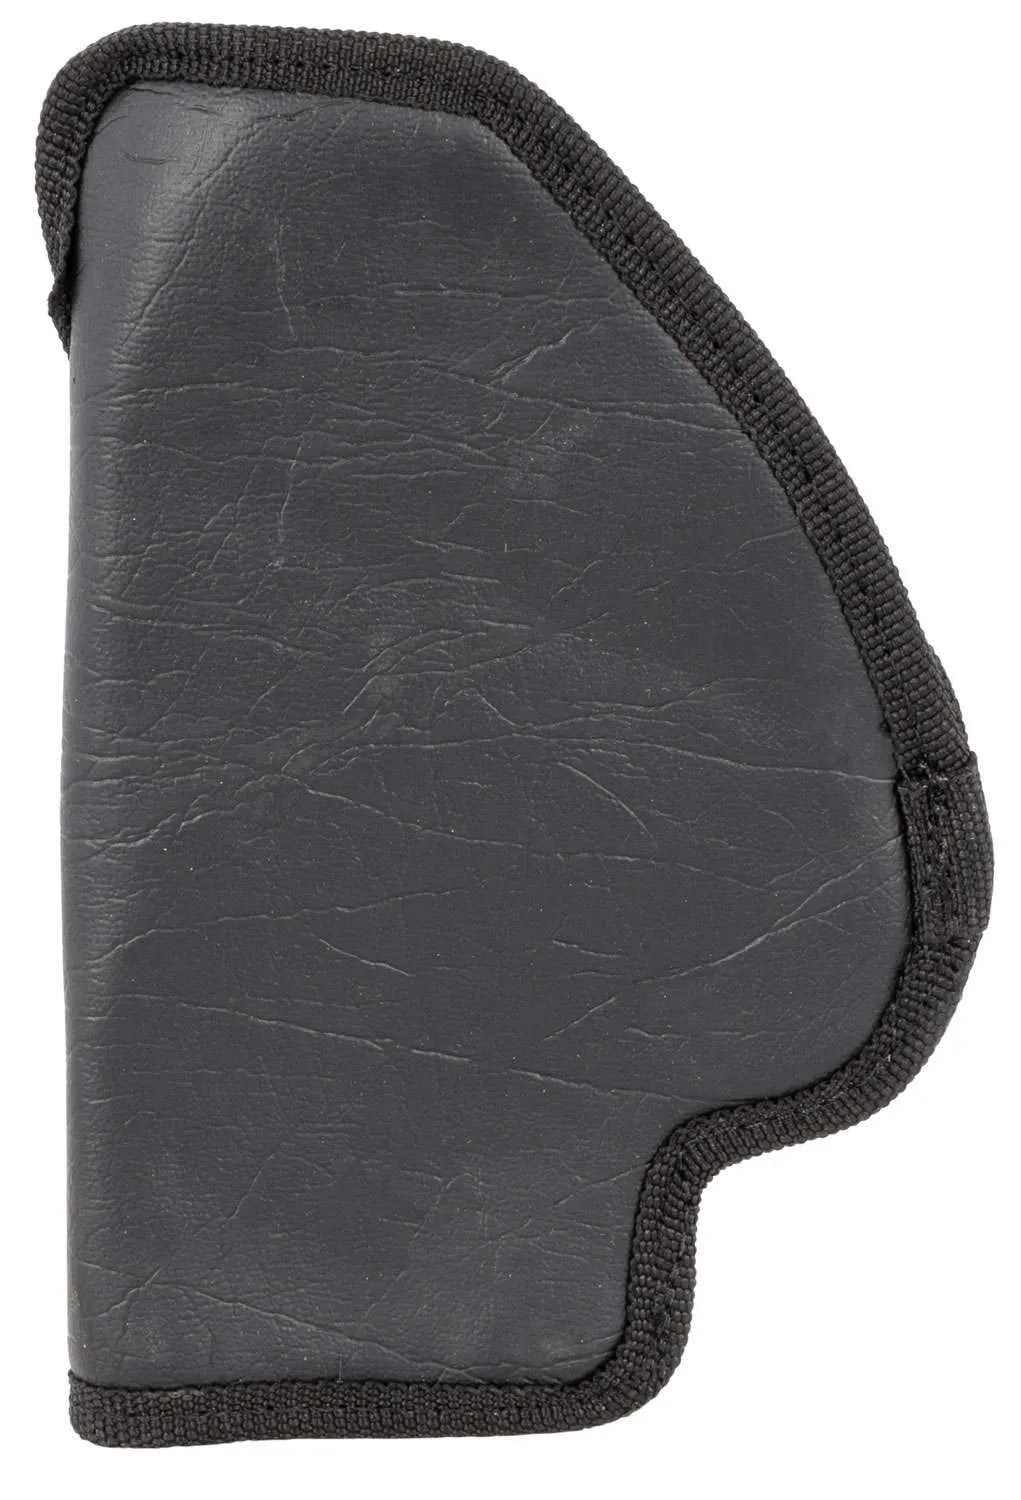 Tagua The Weightless 4-in-1 Black Nylon/Ecoleather IWB Most Double Stack Compacts Right Hand